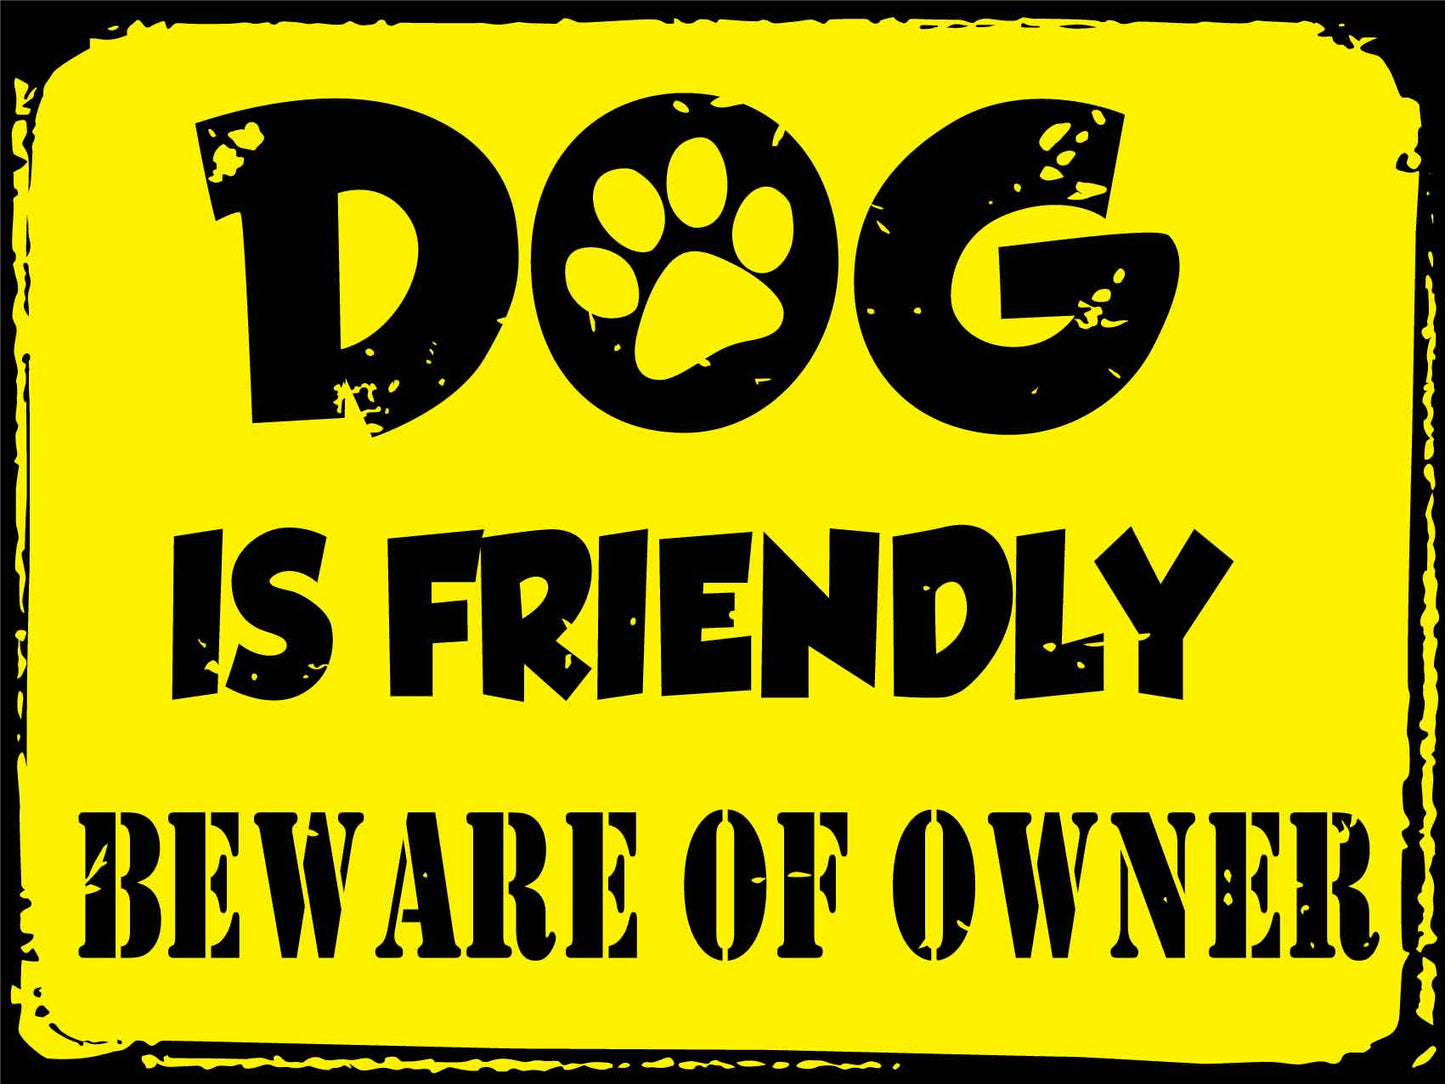 Dog Is Friendly Beware of Owner Sign